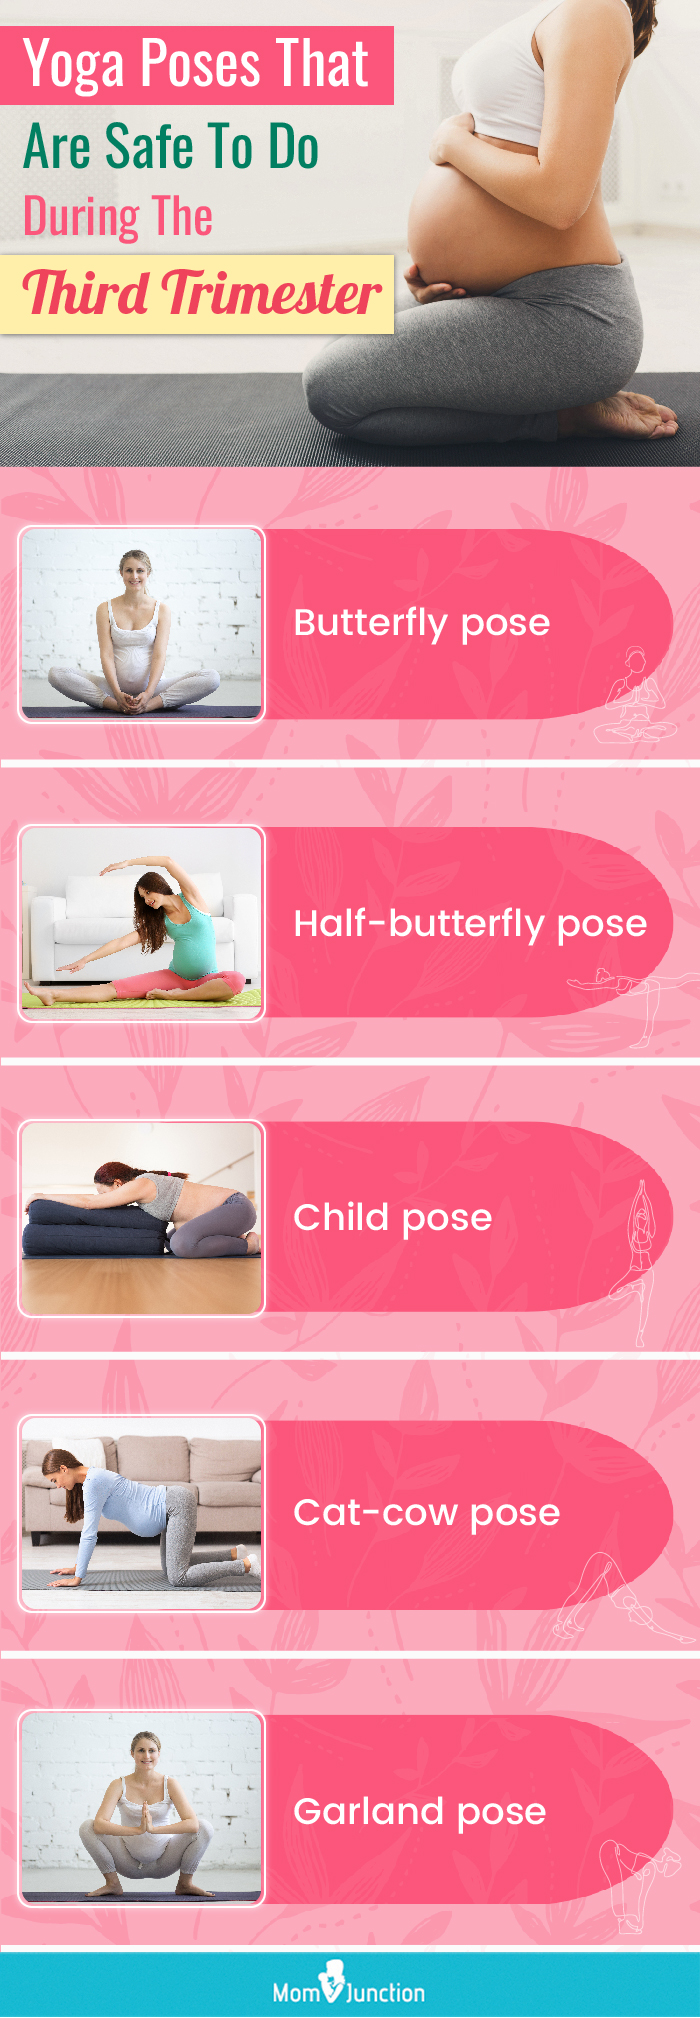 yoga poses that are safe to do during the third trimester (infographic)